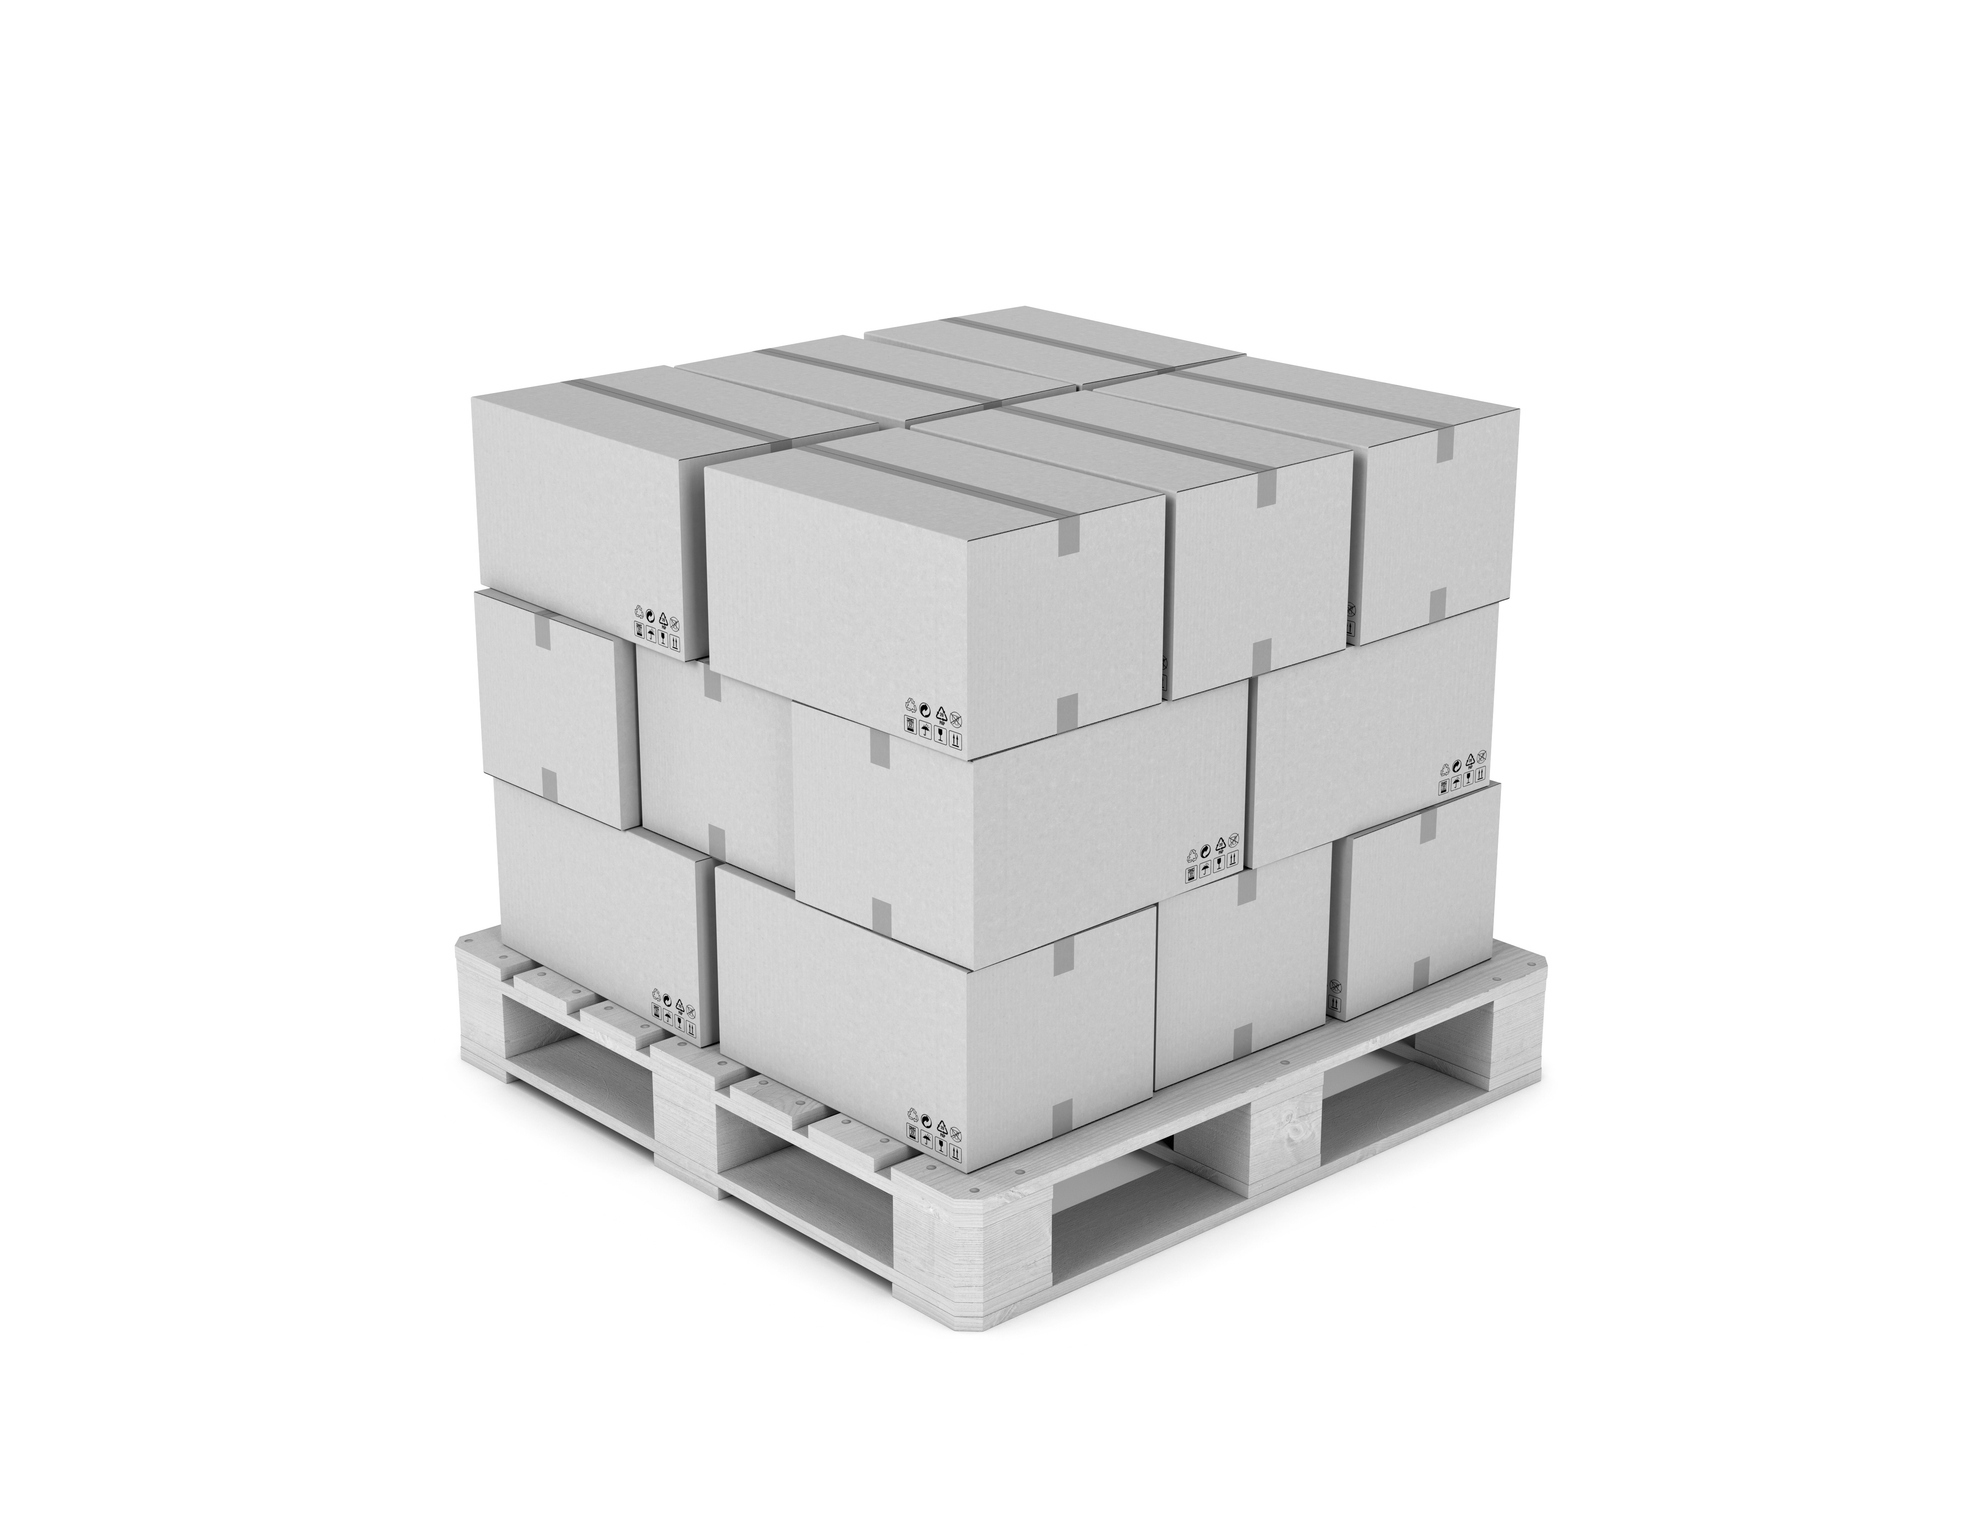 Stacking GMA Pallets: Determining the Best Configuration